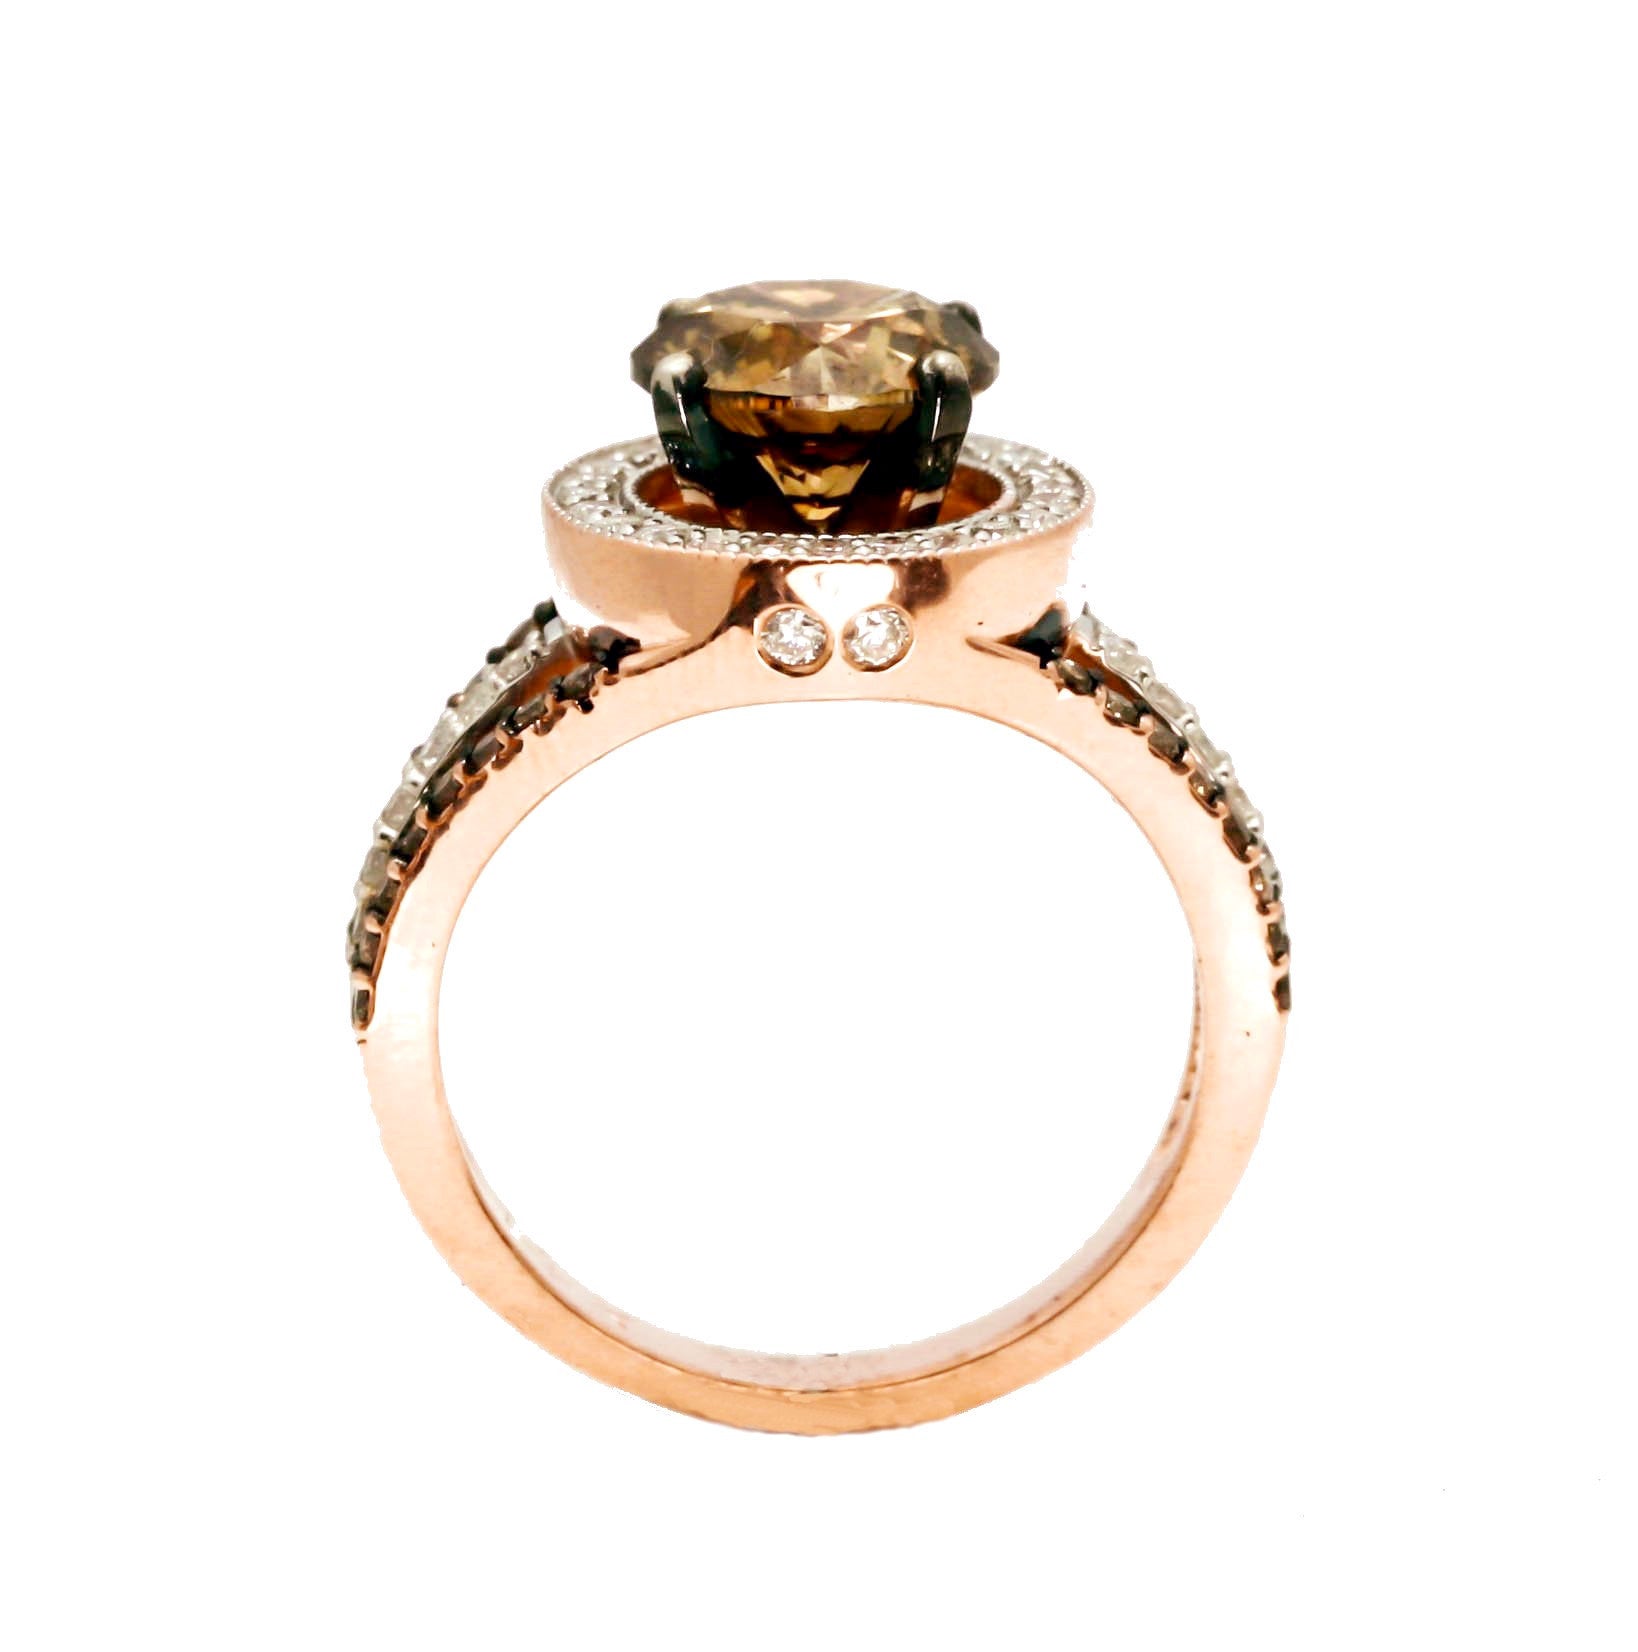 Unique 2 Carat (8 mm) Brown Diamond Engagement Ring, Floating Halo Rose Gold, White & Brown Diamonds, Anniversary Ring - 2BD94627